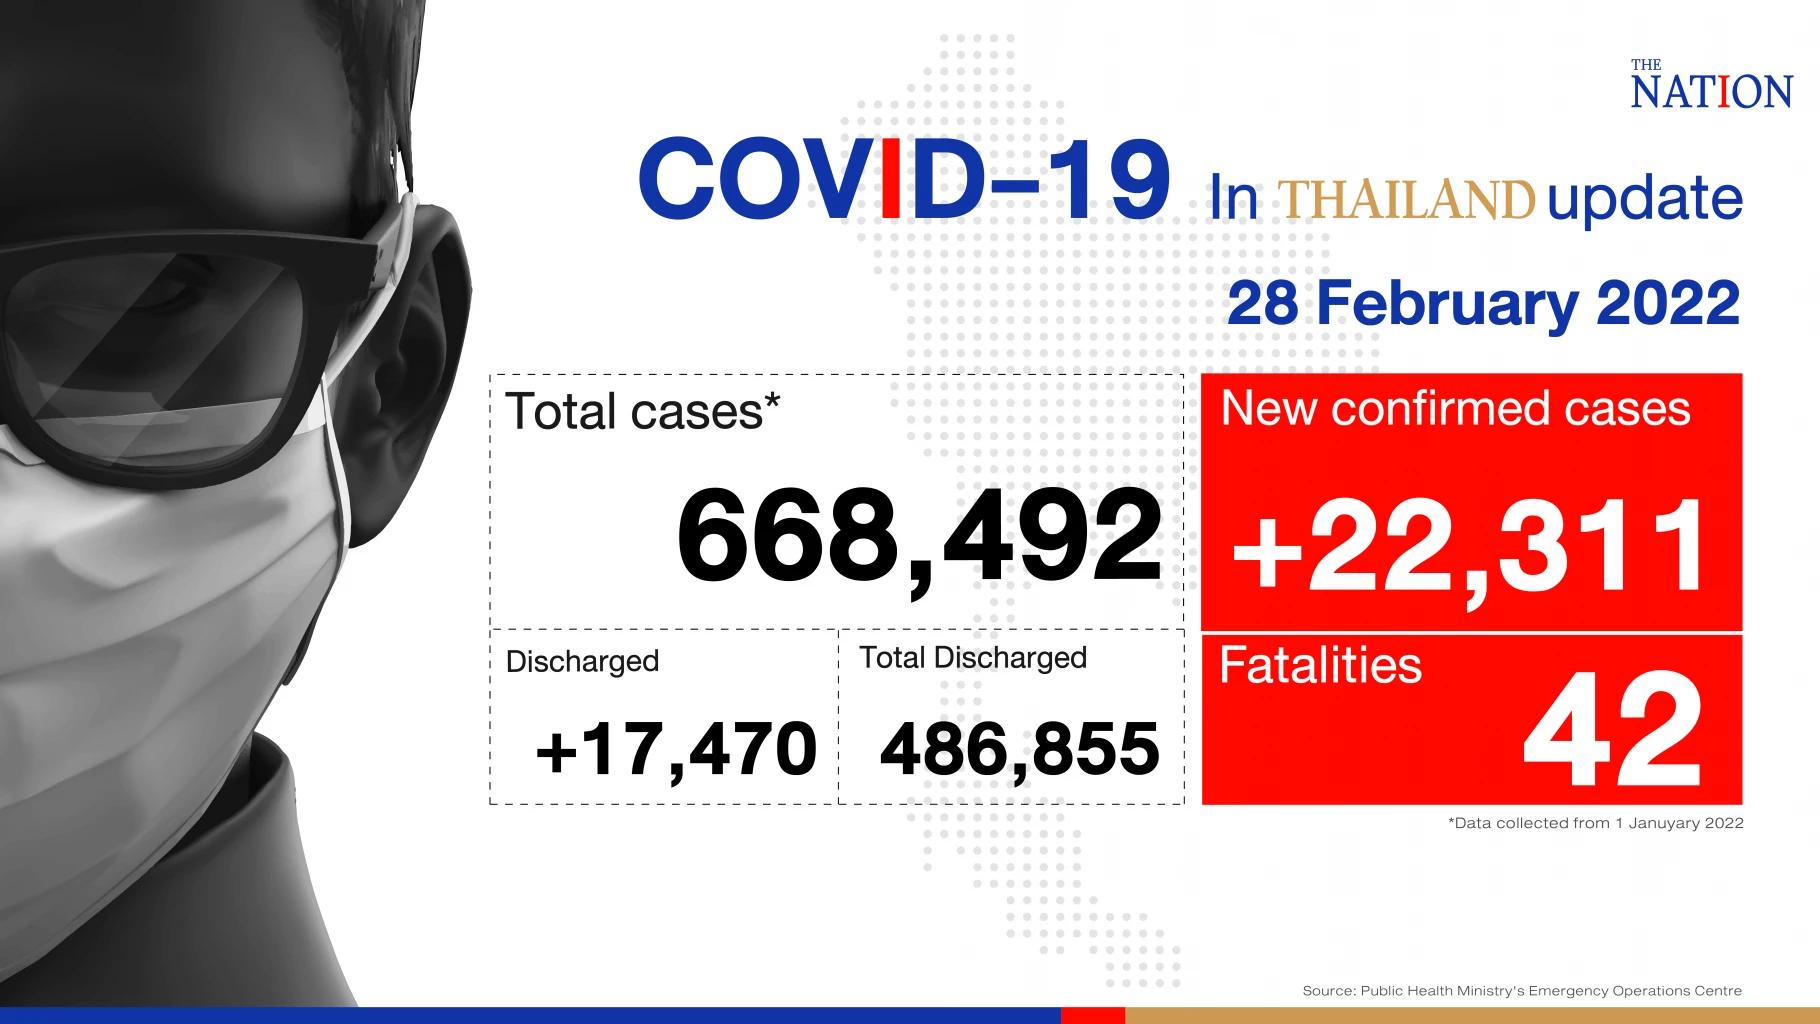 Thailand records 22,311 Covid-19 cases and 42 deaths on Monday